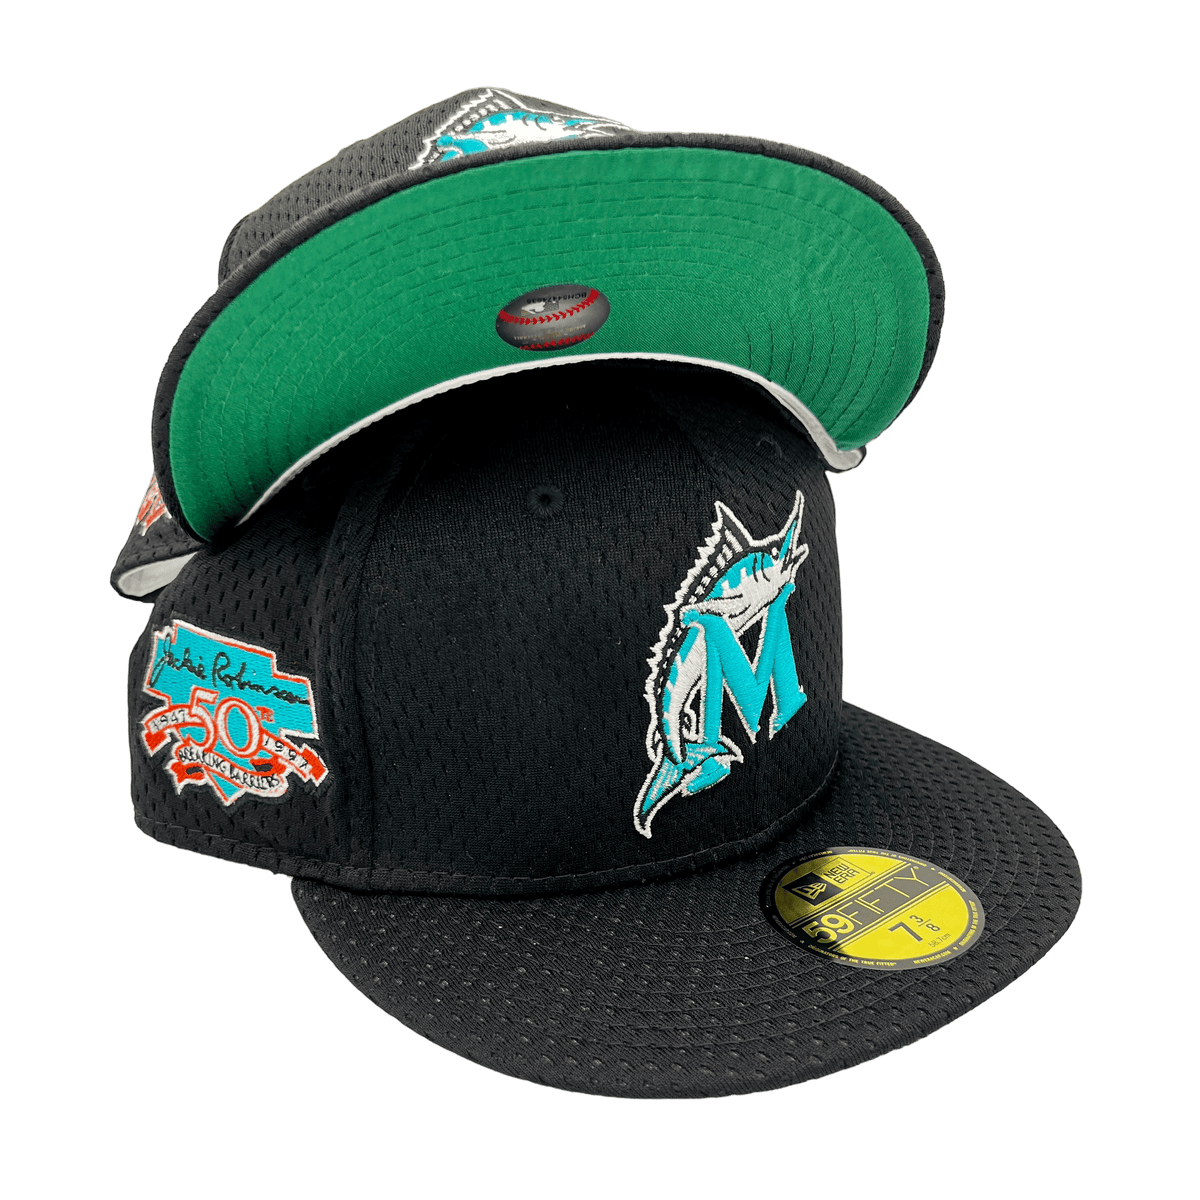 Miami Marlins New Era Green Undervisor 59FIFTY Fitted Hat - Light Blue/Navy